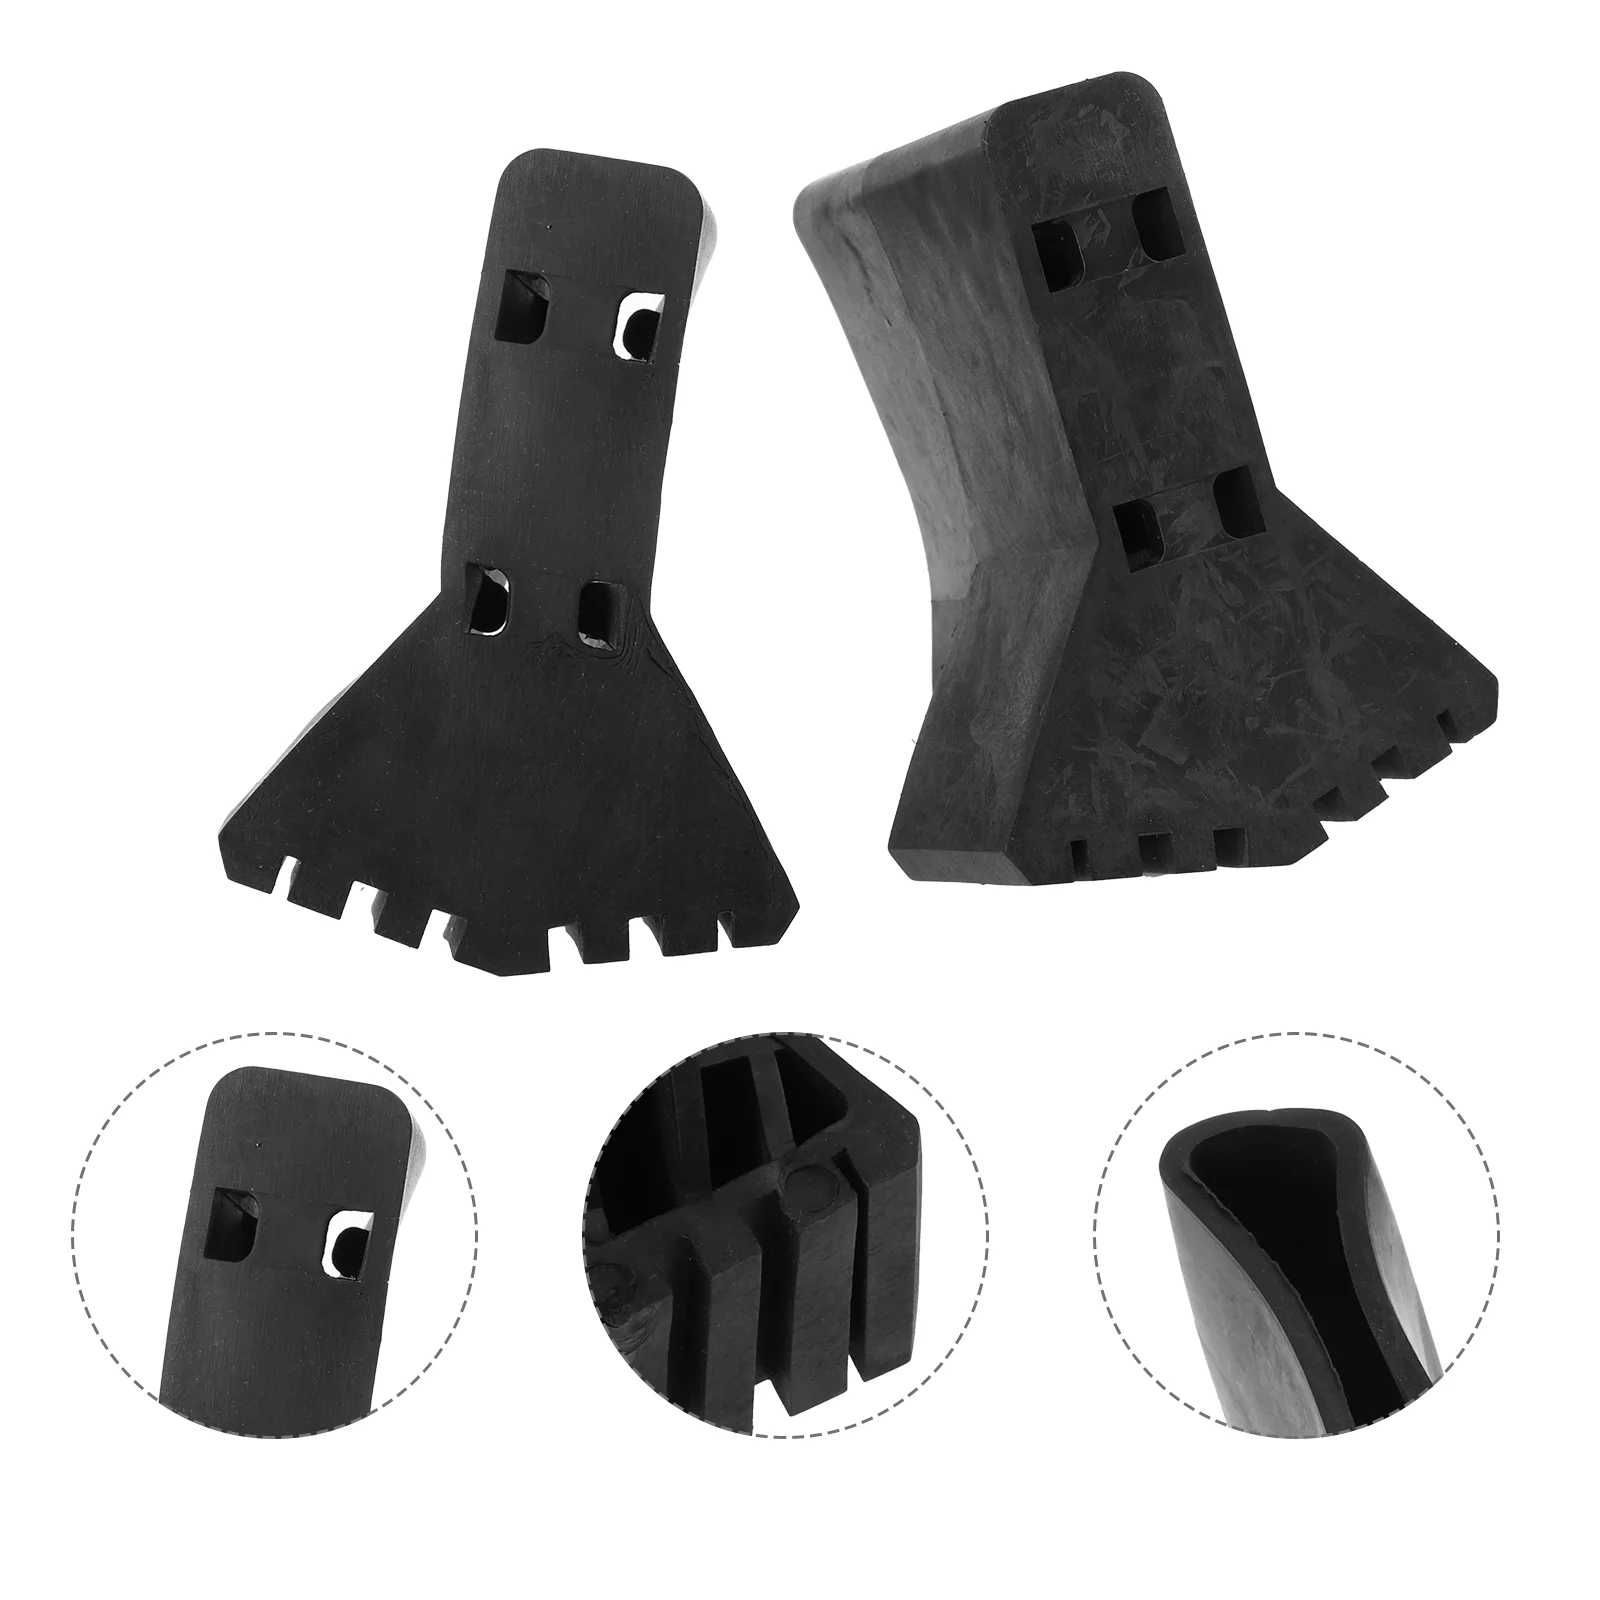 

Ladder Feet Covers Foot Pads Rubber Extension Protector Leg Cover Replacement Non Mat Attic Parts Cushion Boots Step Mitts Caps